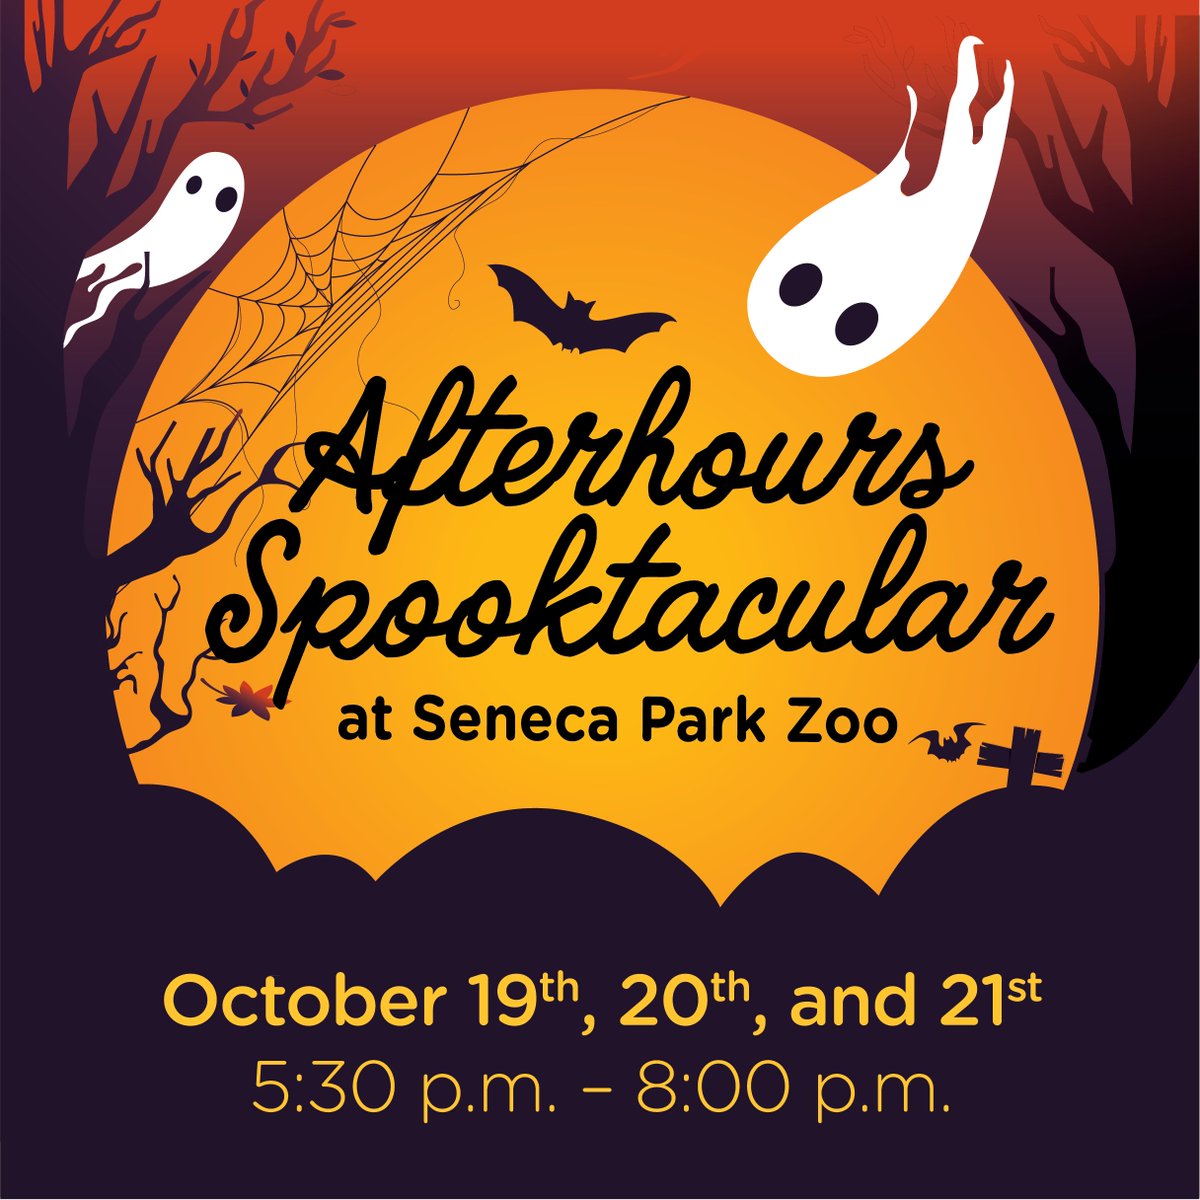 ** Tickets for our Spooktacular event are selling fast - reserve yours now! 🎟 🎃** ow.ly/4Wug50PYgmj Ticket sales are capped and we are almost sold out for Saturday! Plenty available for Thursday and Friday, but that can change quickly. 😬